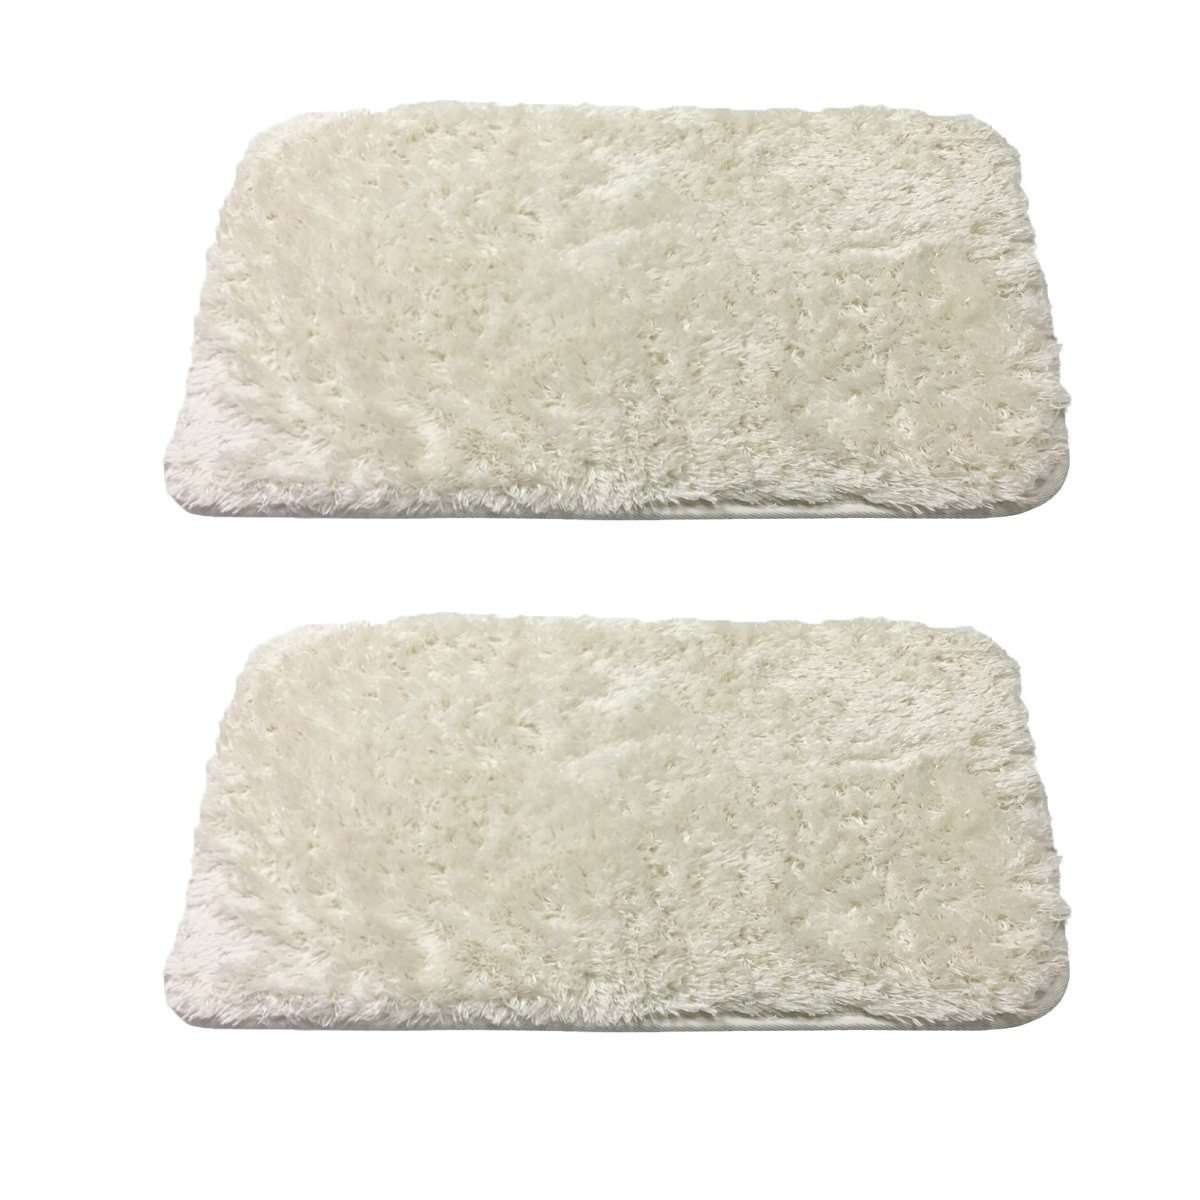 Lakeview Luxury Fuzzy Bath Rugs - Luxor Linens 